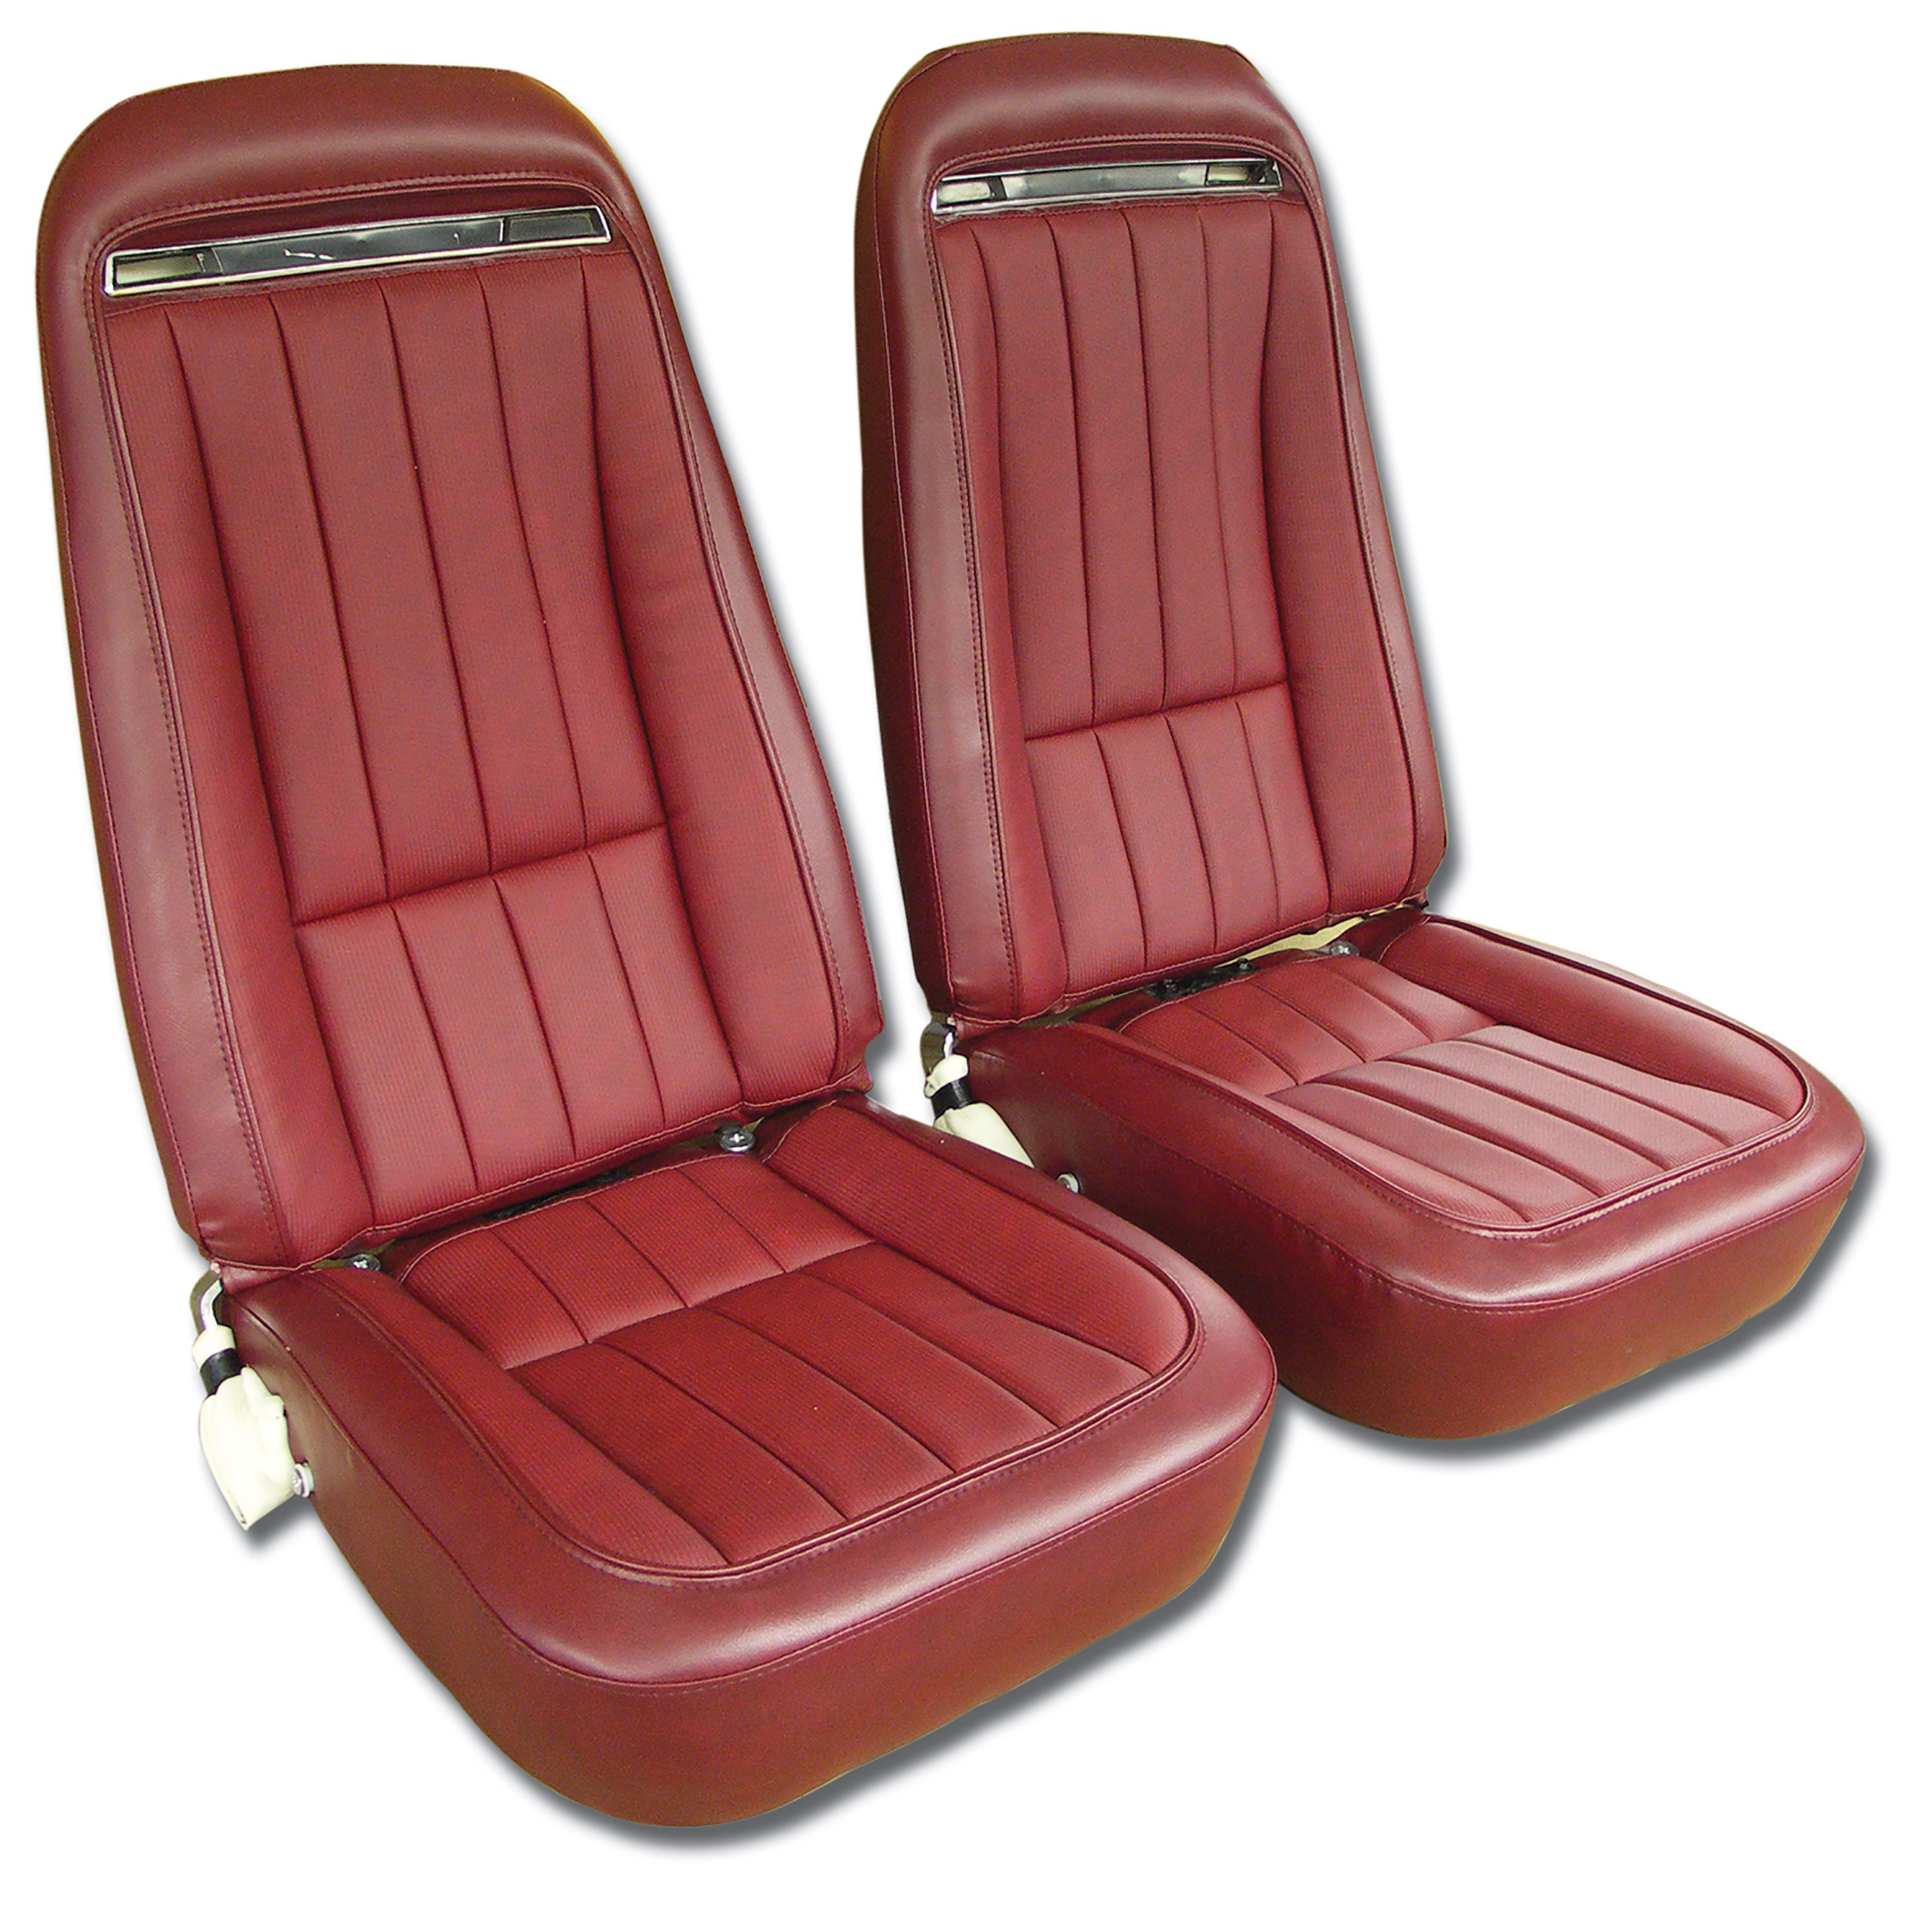 1975 C3 Corvette Mounted Seats Oxblood "Leather-Like" Vinyl Without Shoulder Harness